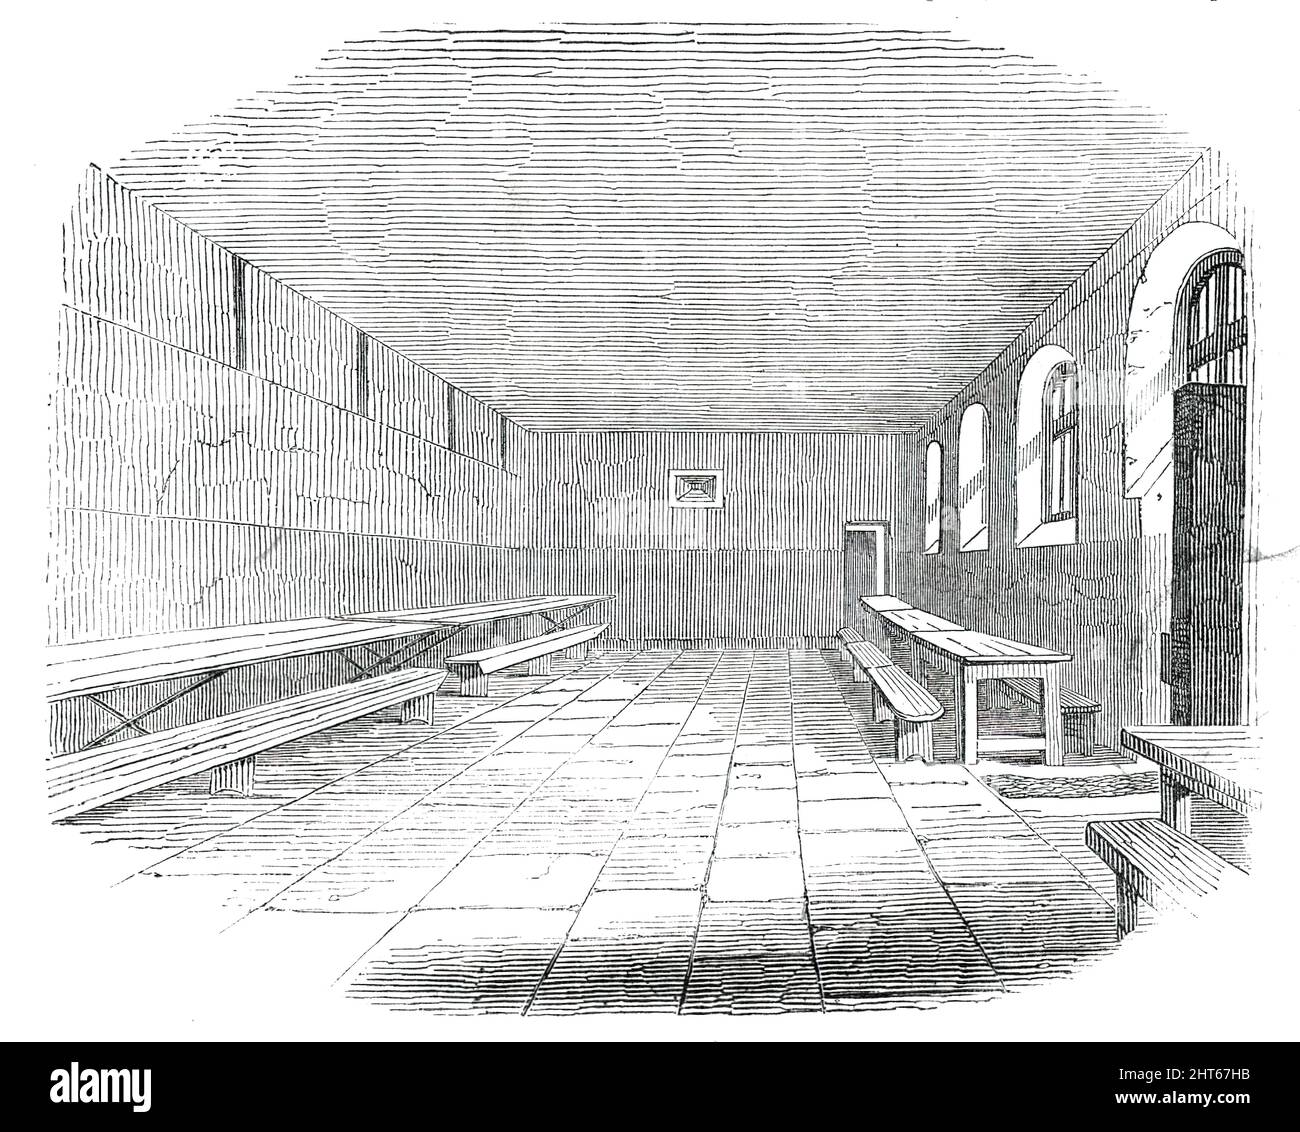 Dining Ward, Newgate Prison, [London], 1850. Extract from a report of the State of the Prison: 'The great corruption of Newgate still appears to be most fearful in the transport wards. The condition of the transports [those waiting to be 'transported' to penal colonies], confined for months in perfect idleness, makes them spend their leisure time in awfully corrupting one another. The language, acts, and habits of these utterly depraved men; their filthiness, falsehood, and pernicious animosities; are too bad to be described. The magistrates wish these men removed to their proper place of conf Stock Photo